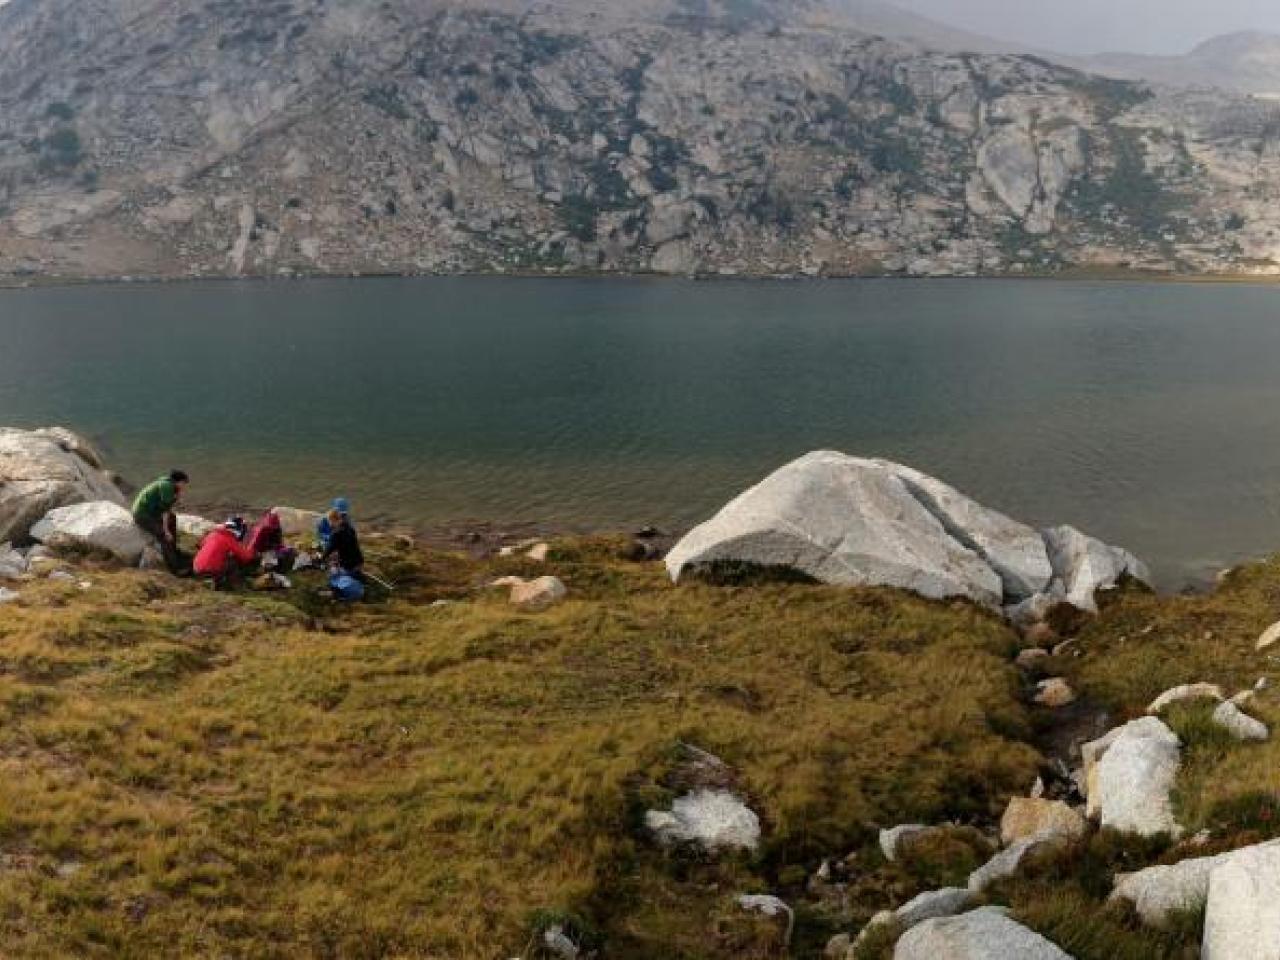 People at the edge of a body of water in mountainous terrain.